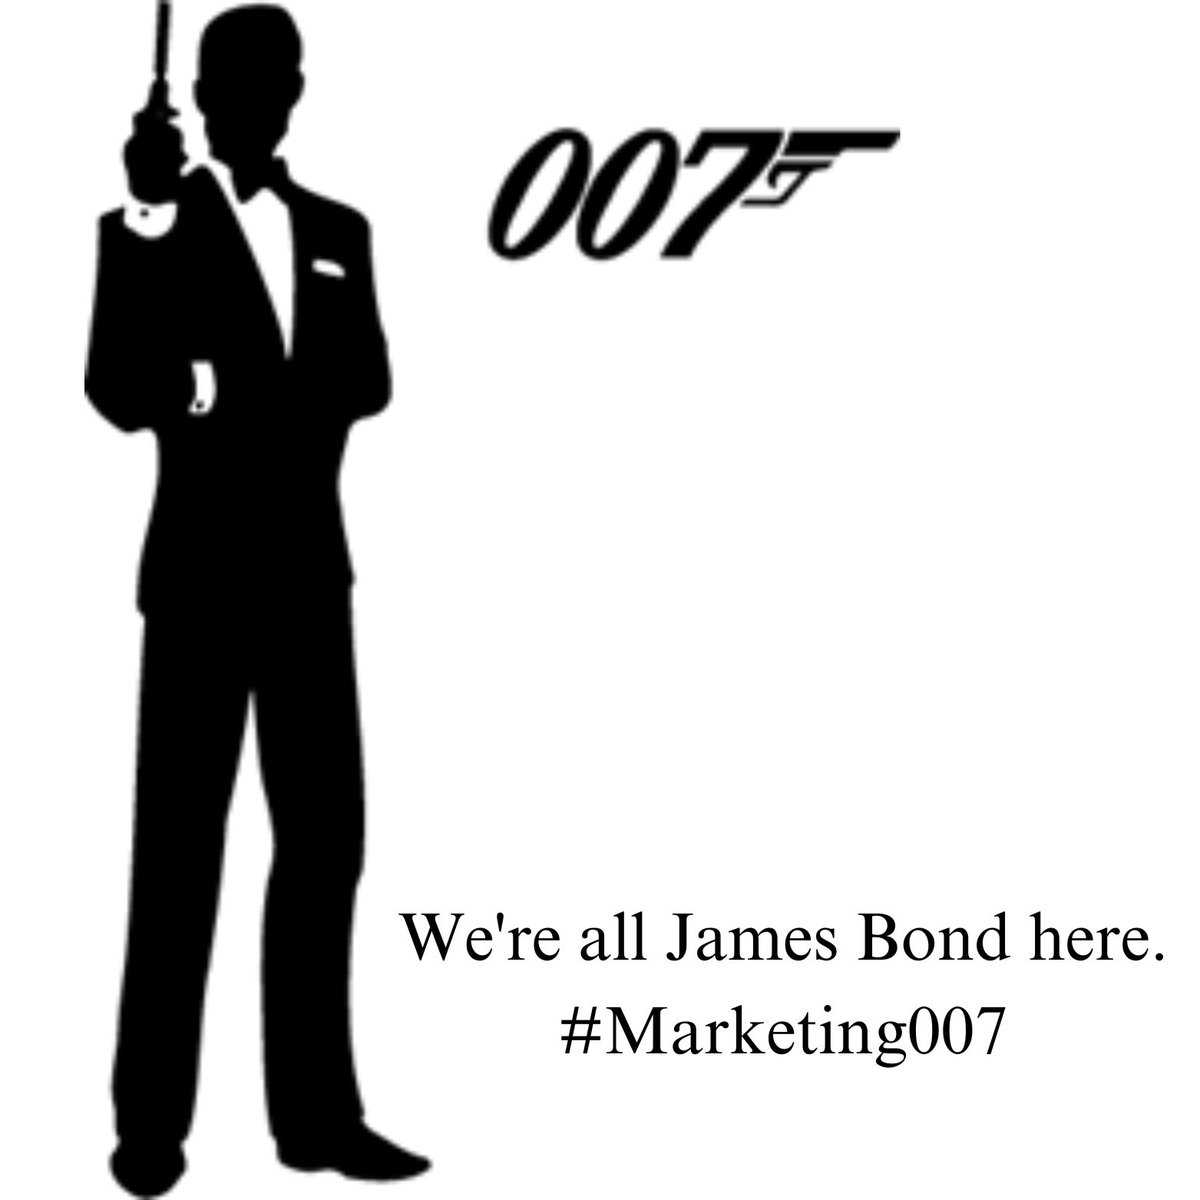 In the world of marketing, we're all James Bond. Armed with data, creativity, and a bit of charm, we're here to outsmart the competition and win hearts. 🍸 #Marketing007 #AgentOfChange